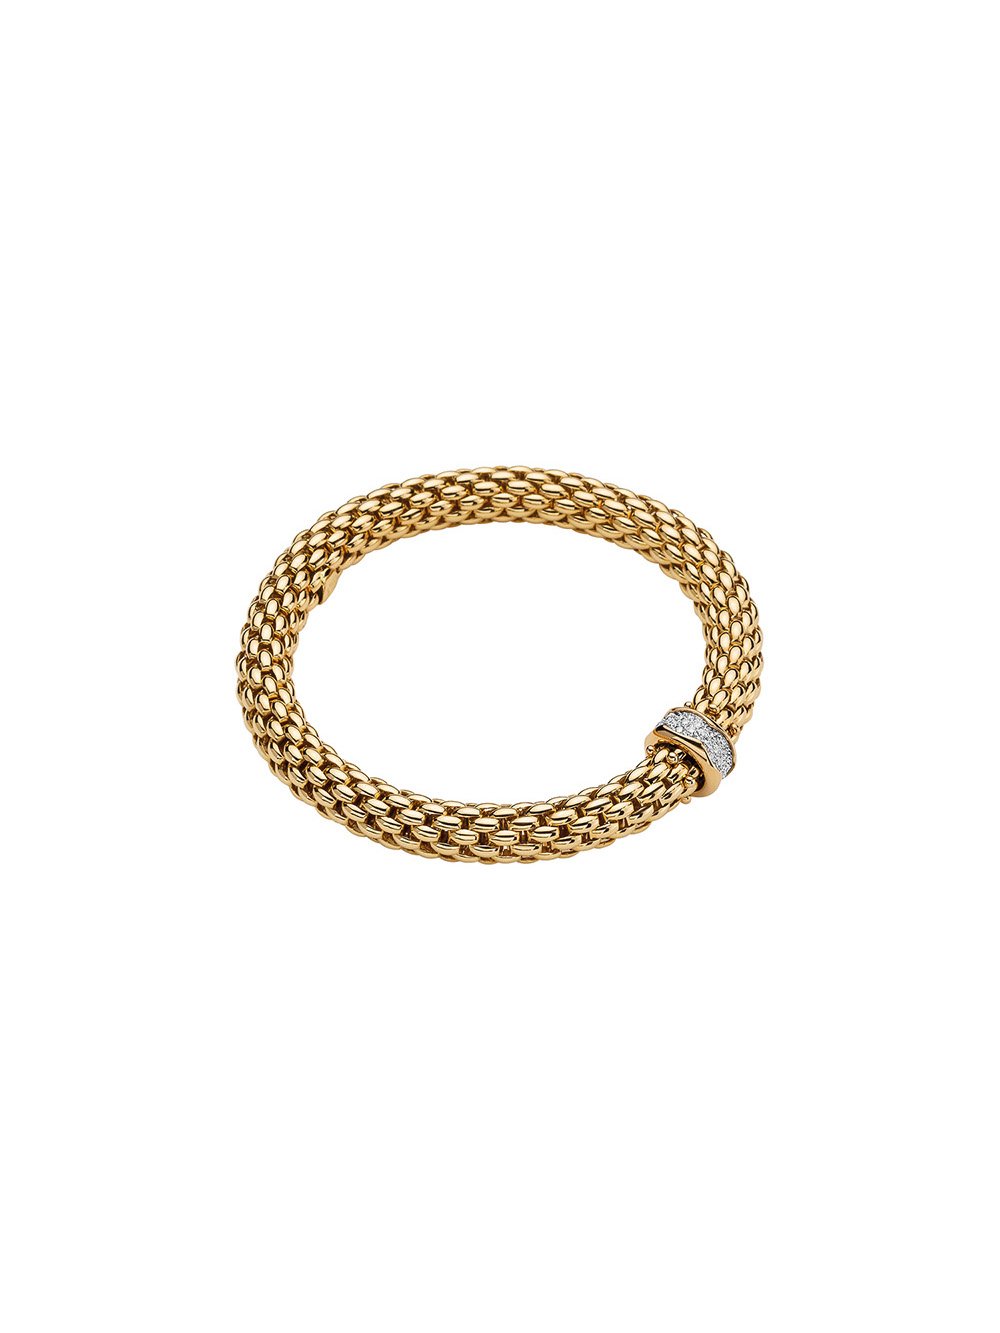 Fope Love Nest Bracelet in 18ct Yellow Gold with Diamonds